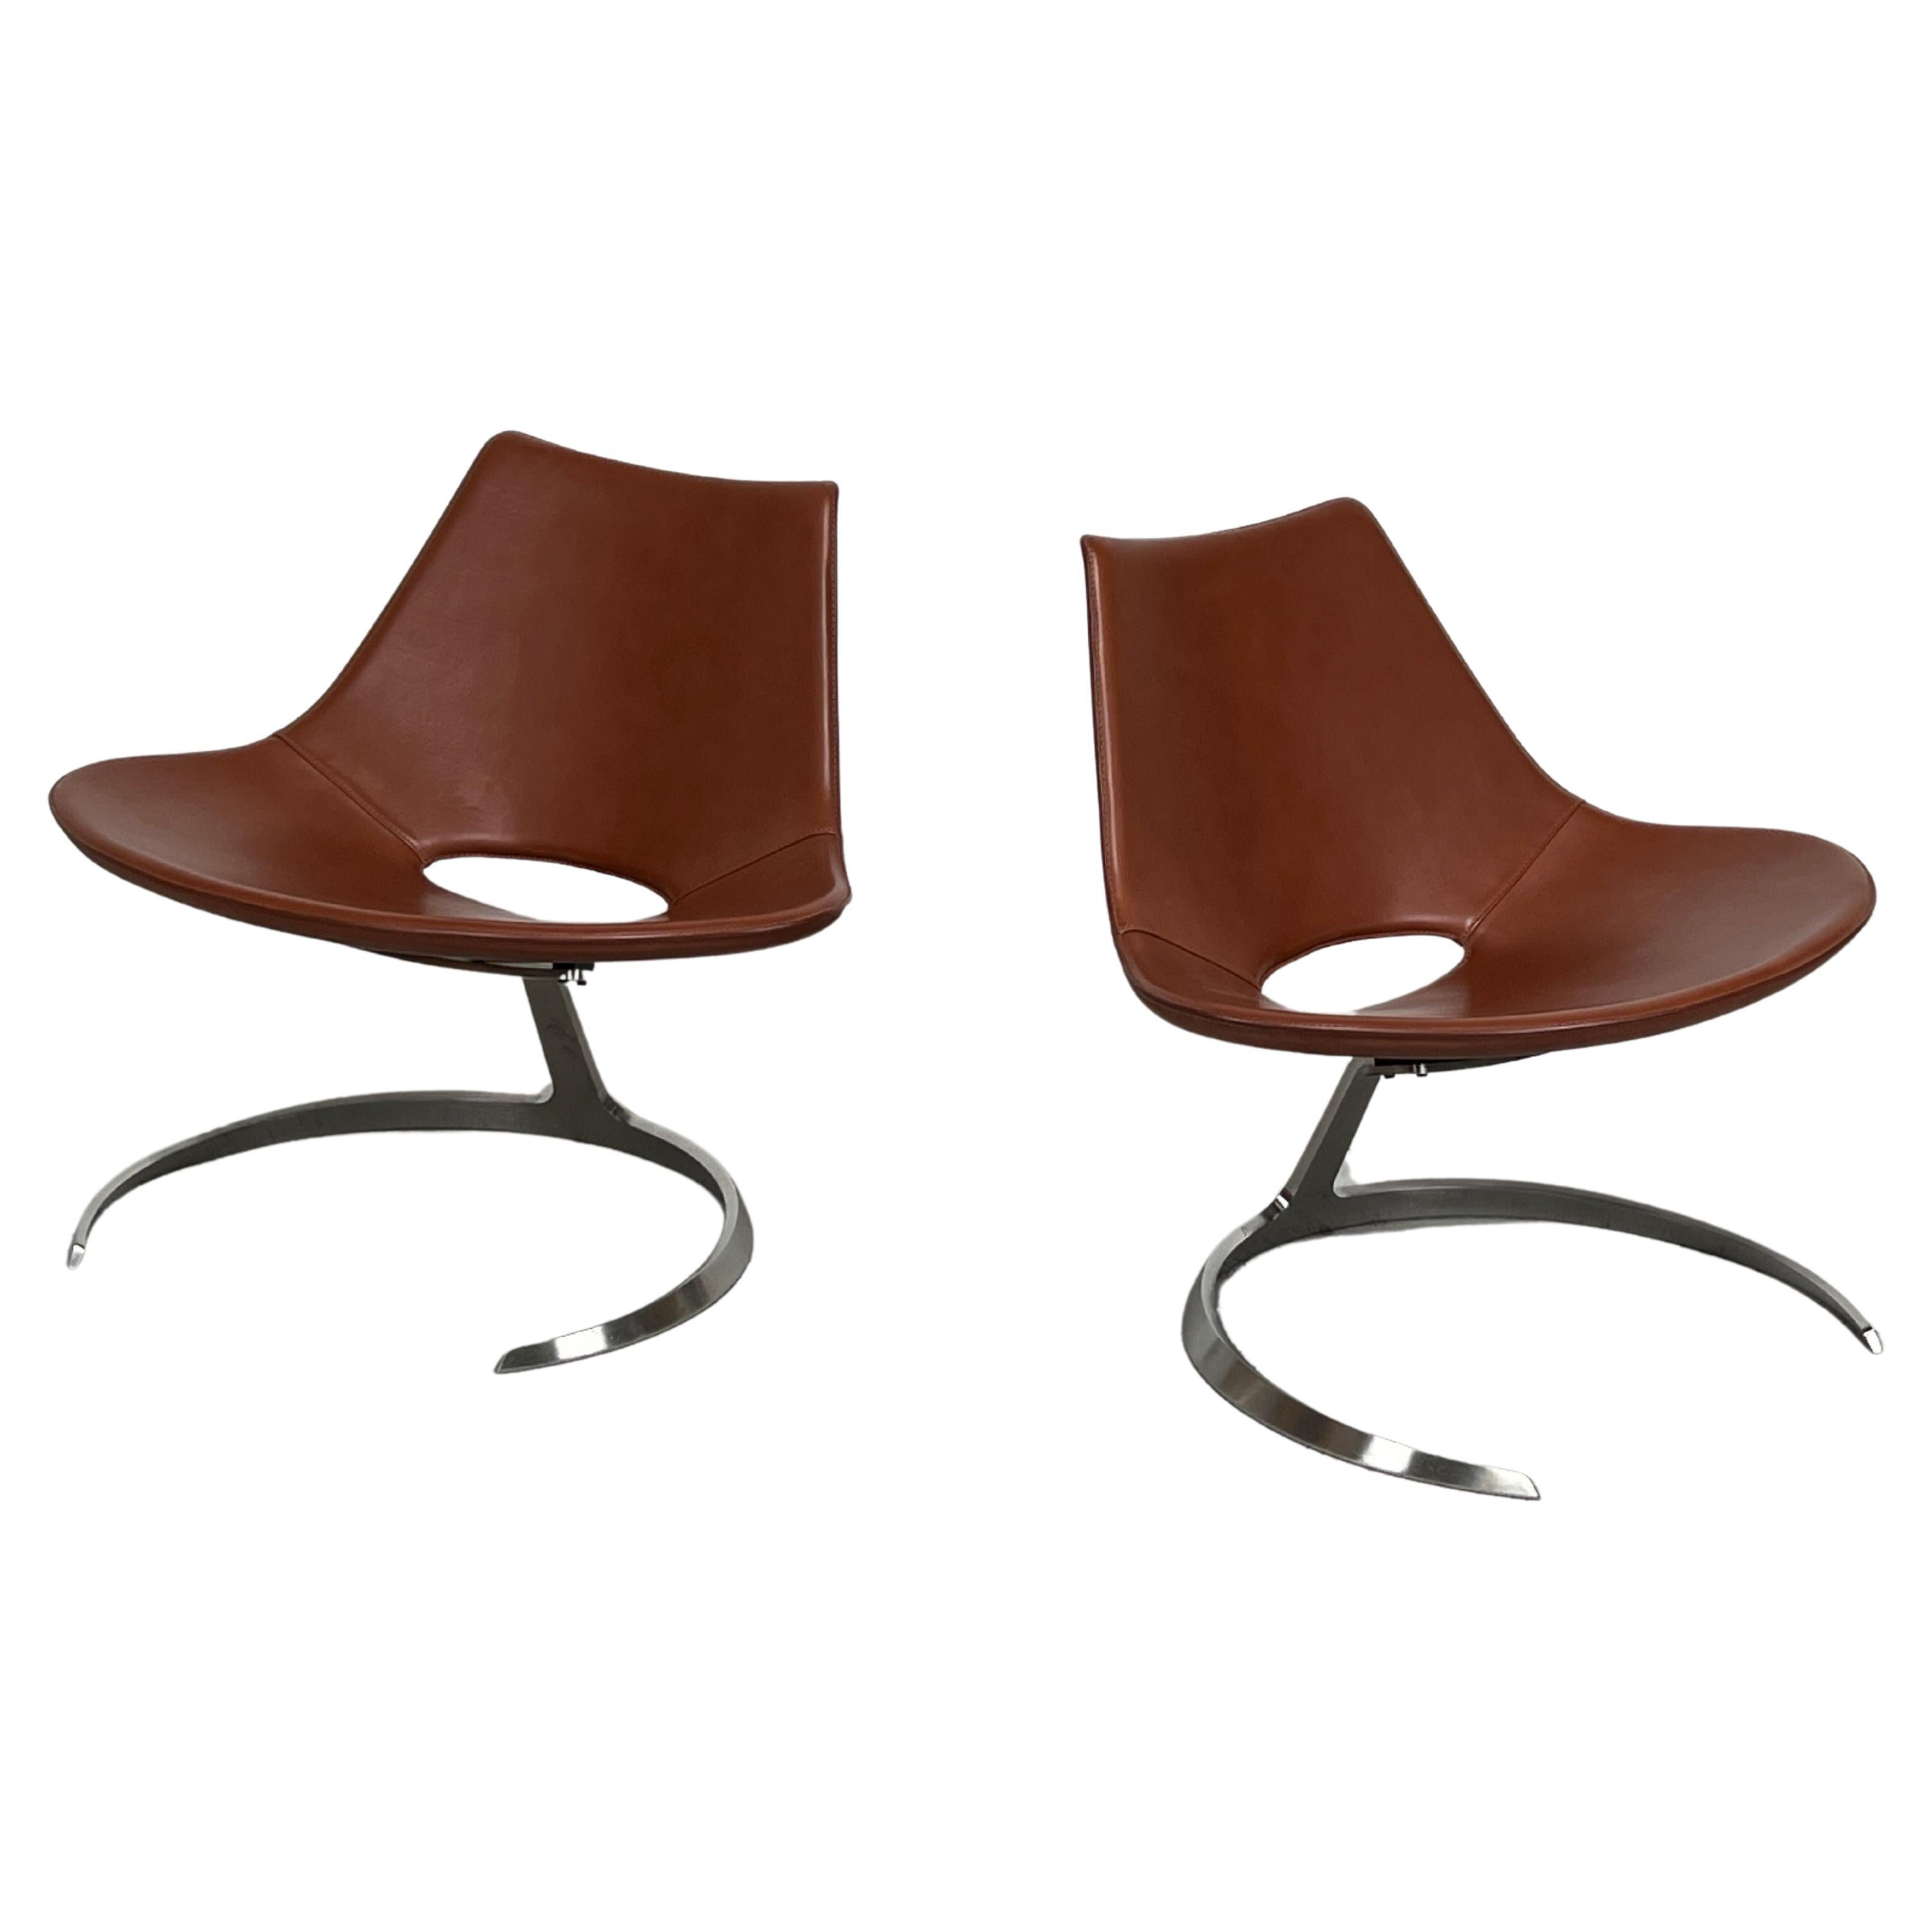 Pair of "Scimitar" Lounge Chairs by Preben Fabricius and Jørgen Kastholm 